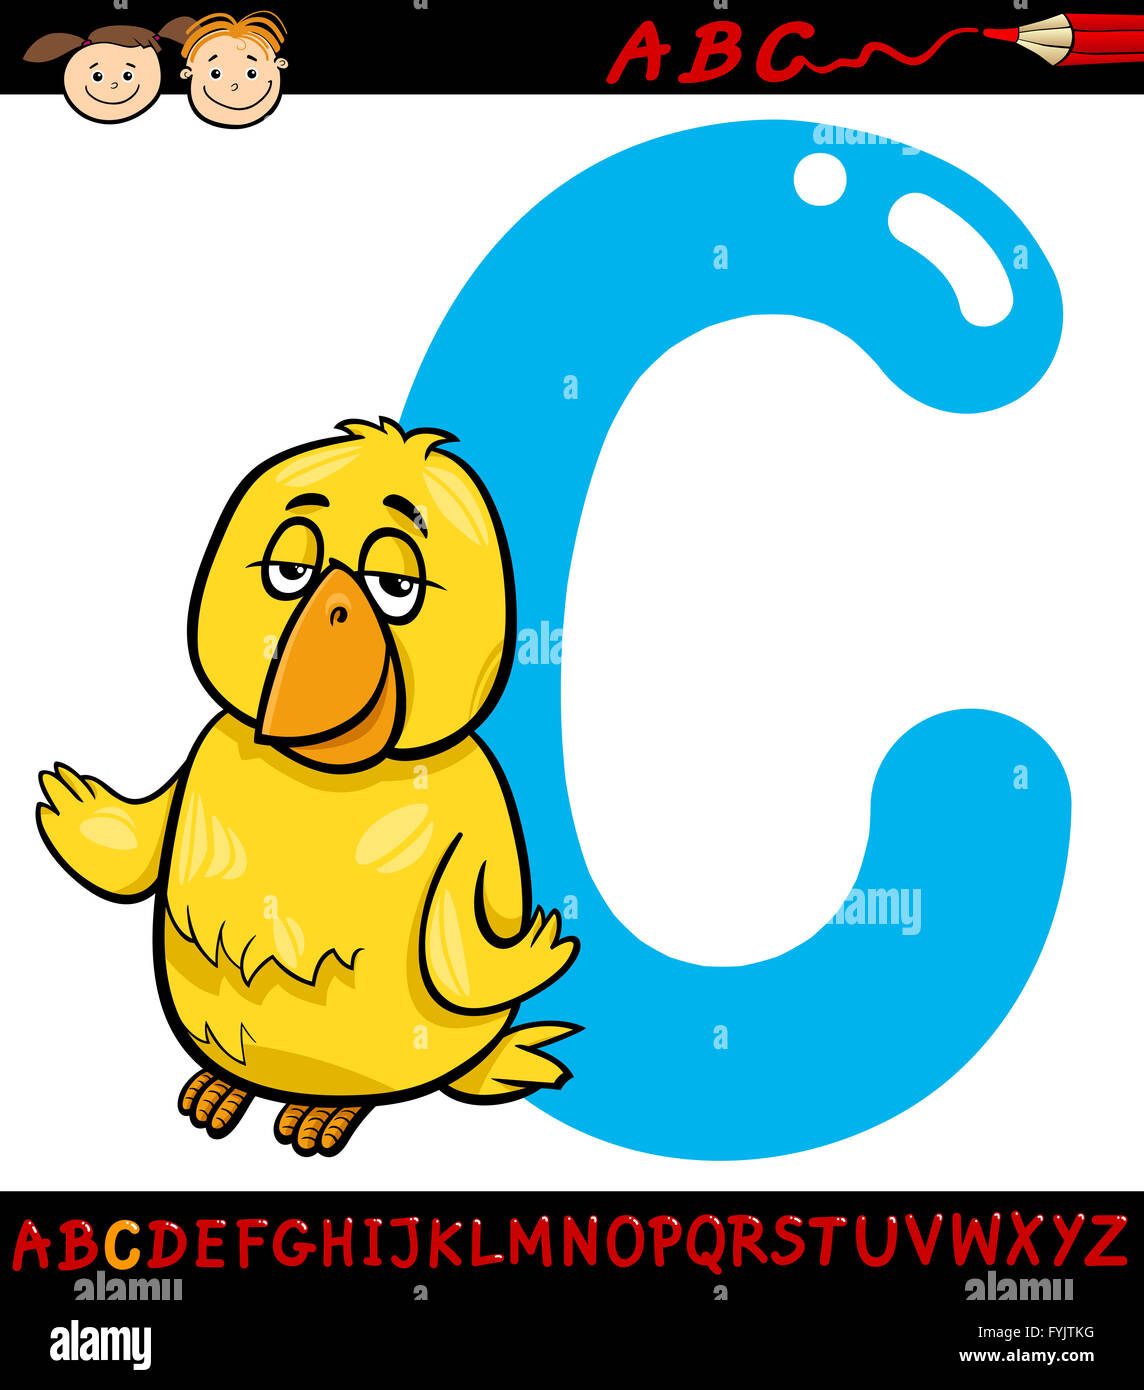 letter c for canary cartoon illustration Stock Photo - Alamy